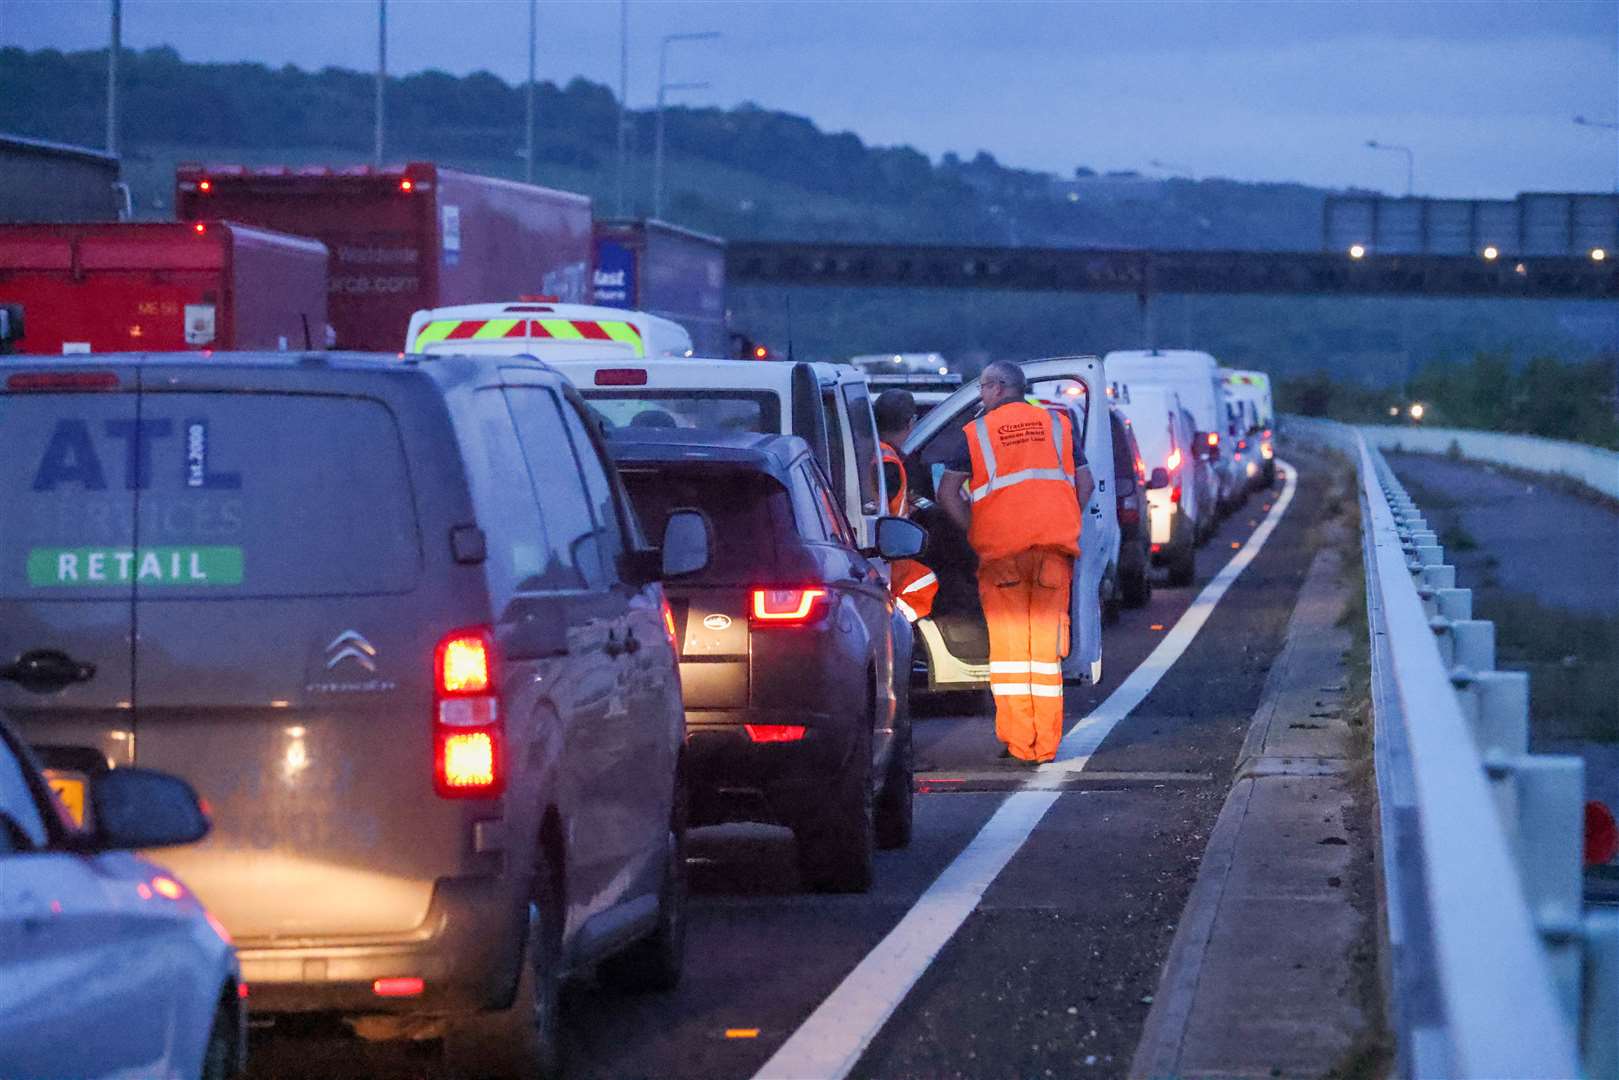 The scene on the M2 earlier this morning. Picture: UKNIP